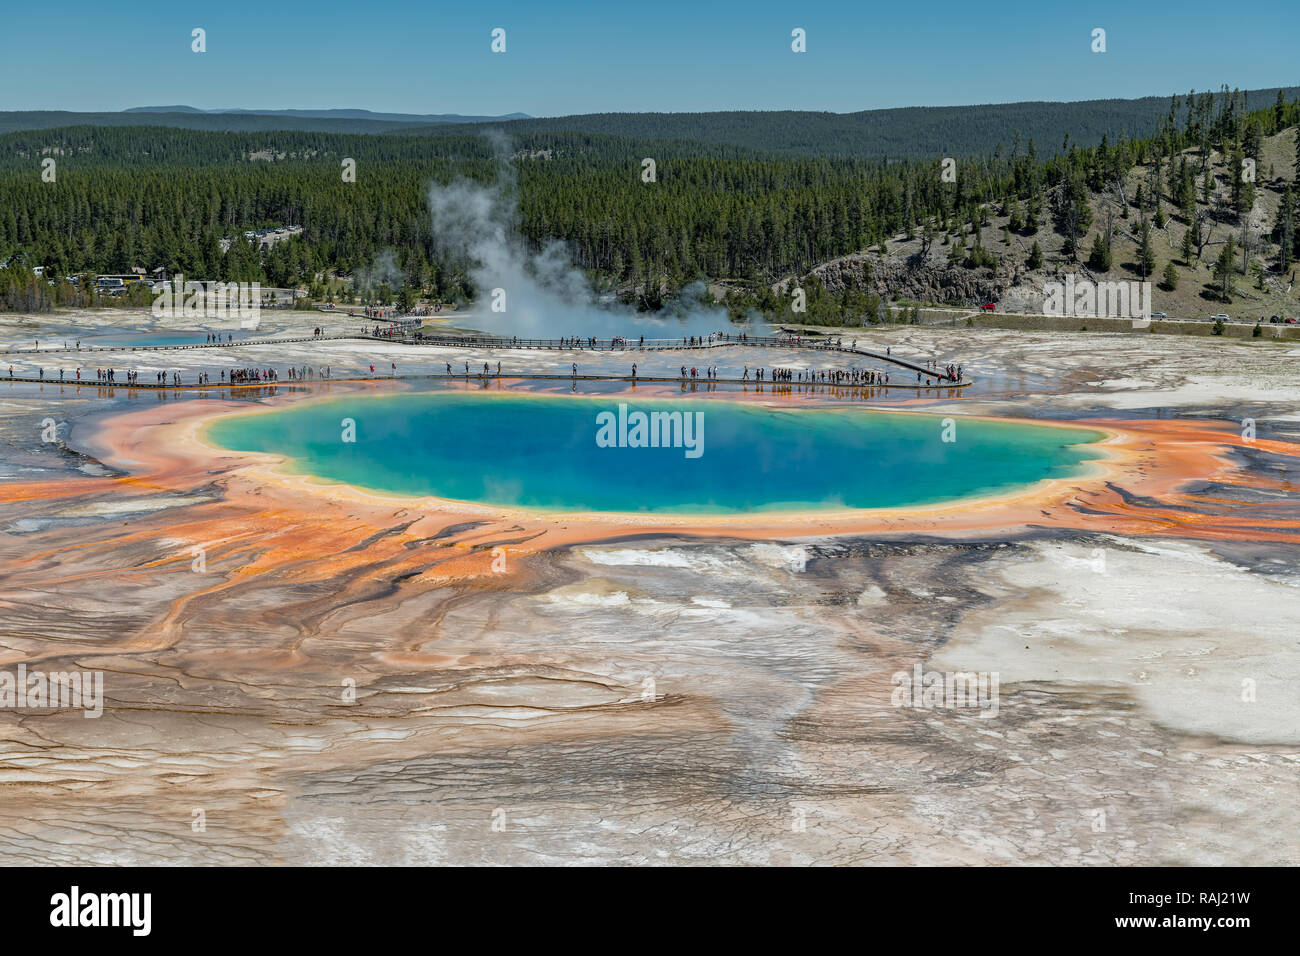 Grand Prismatic Spring. Hot Springs. Le Parc National de Yellowstone. Le Wyoming. USA. Banque D'Images